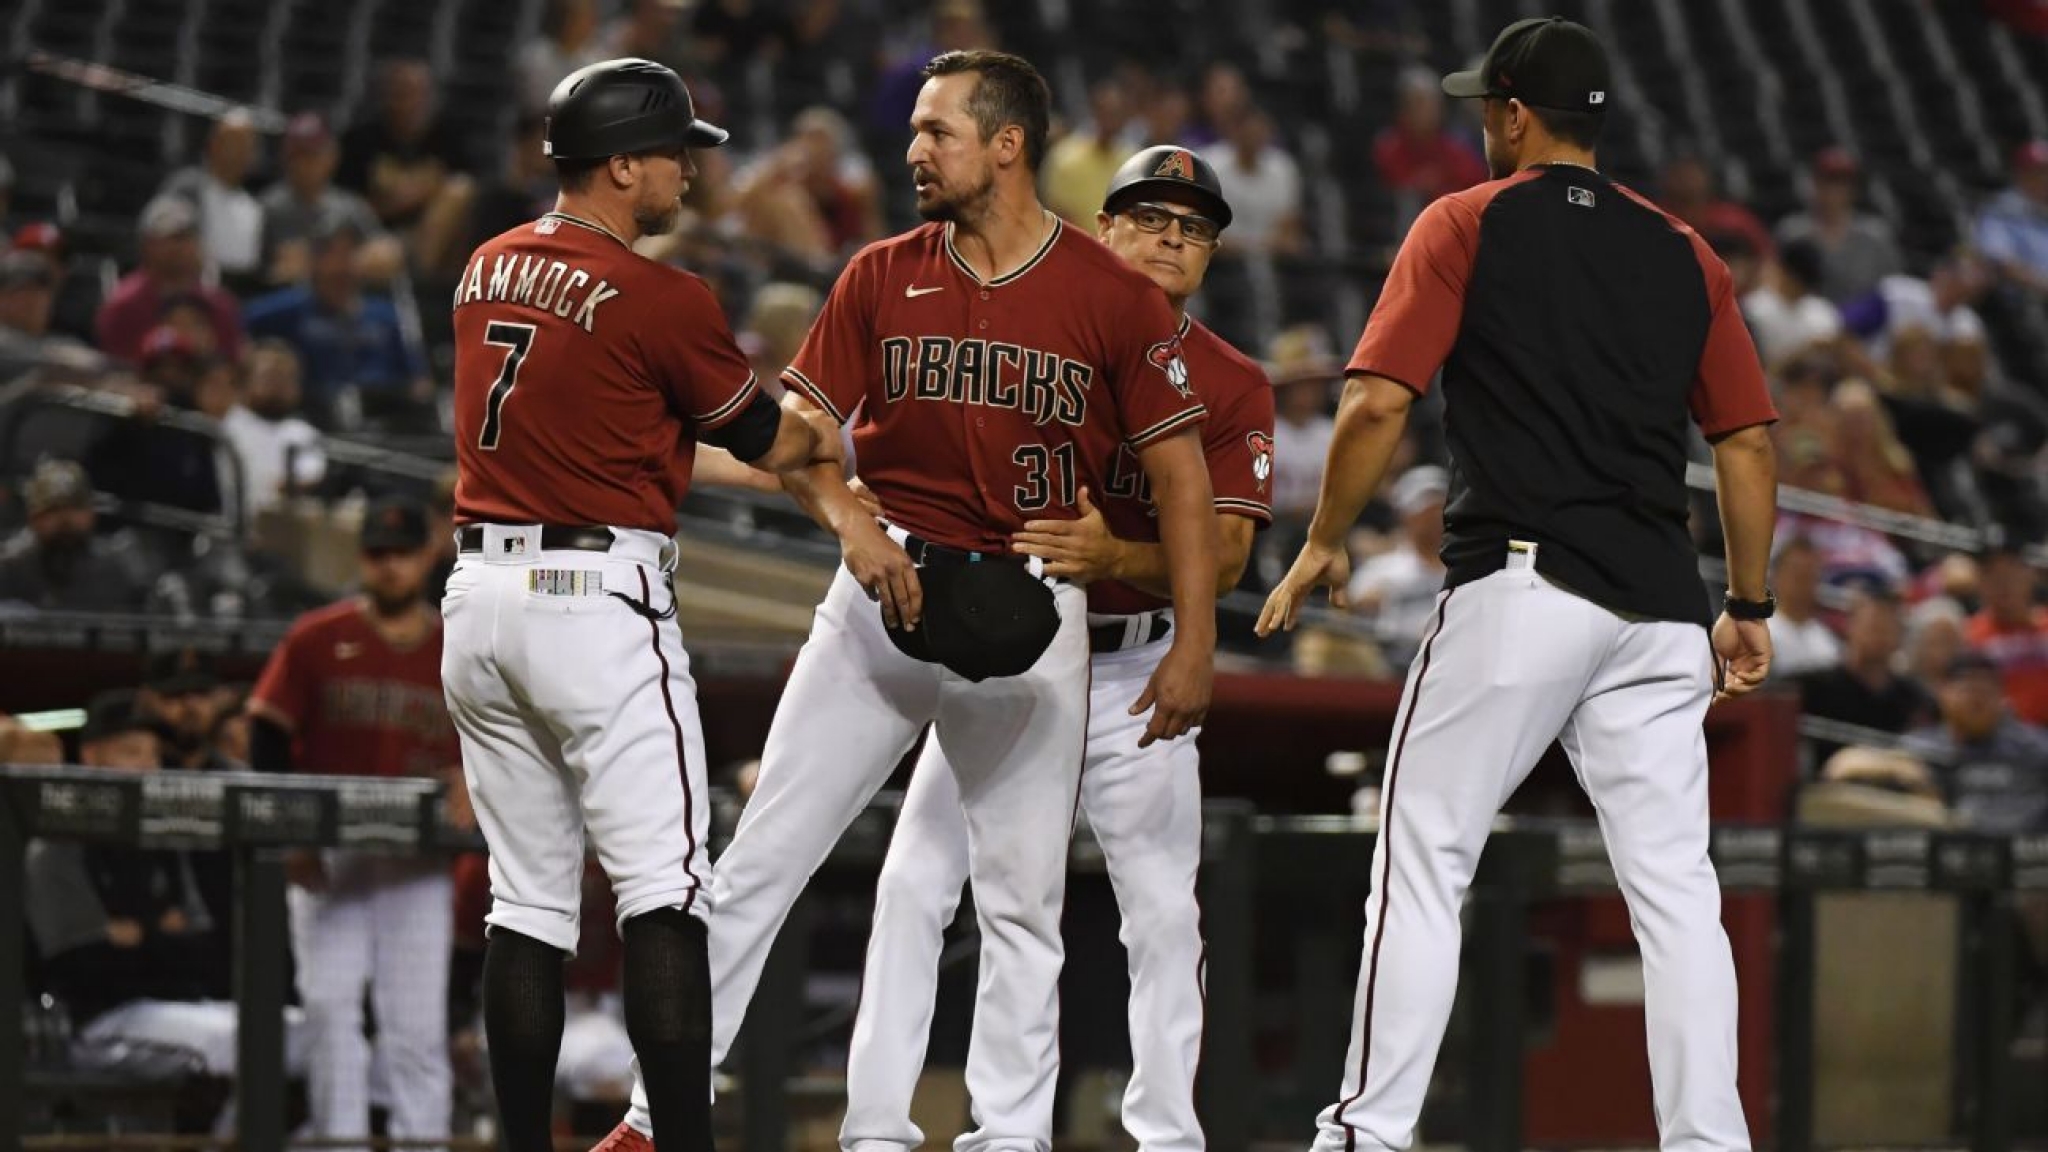 D-backs’ Smith tossed after spots found on glove